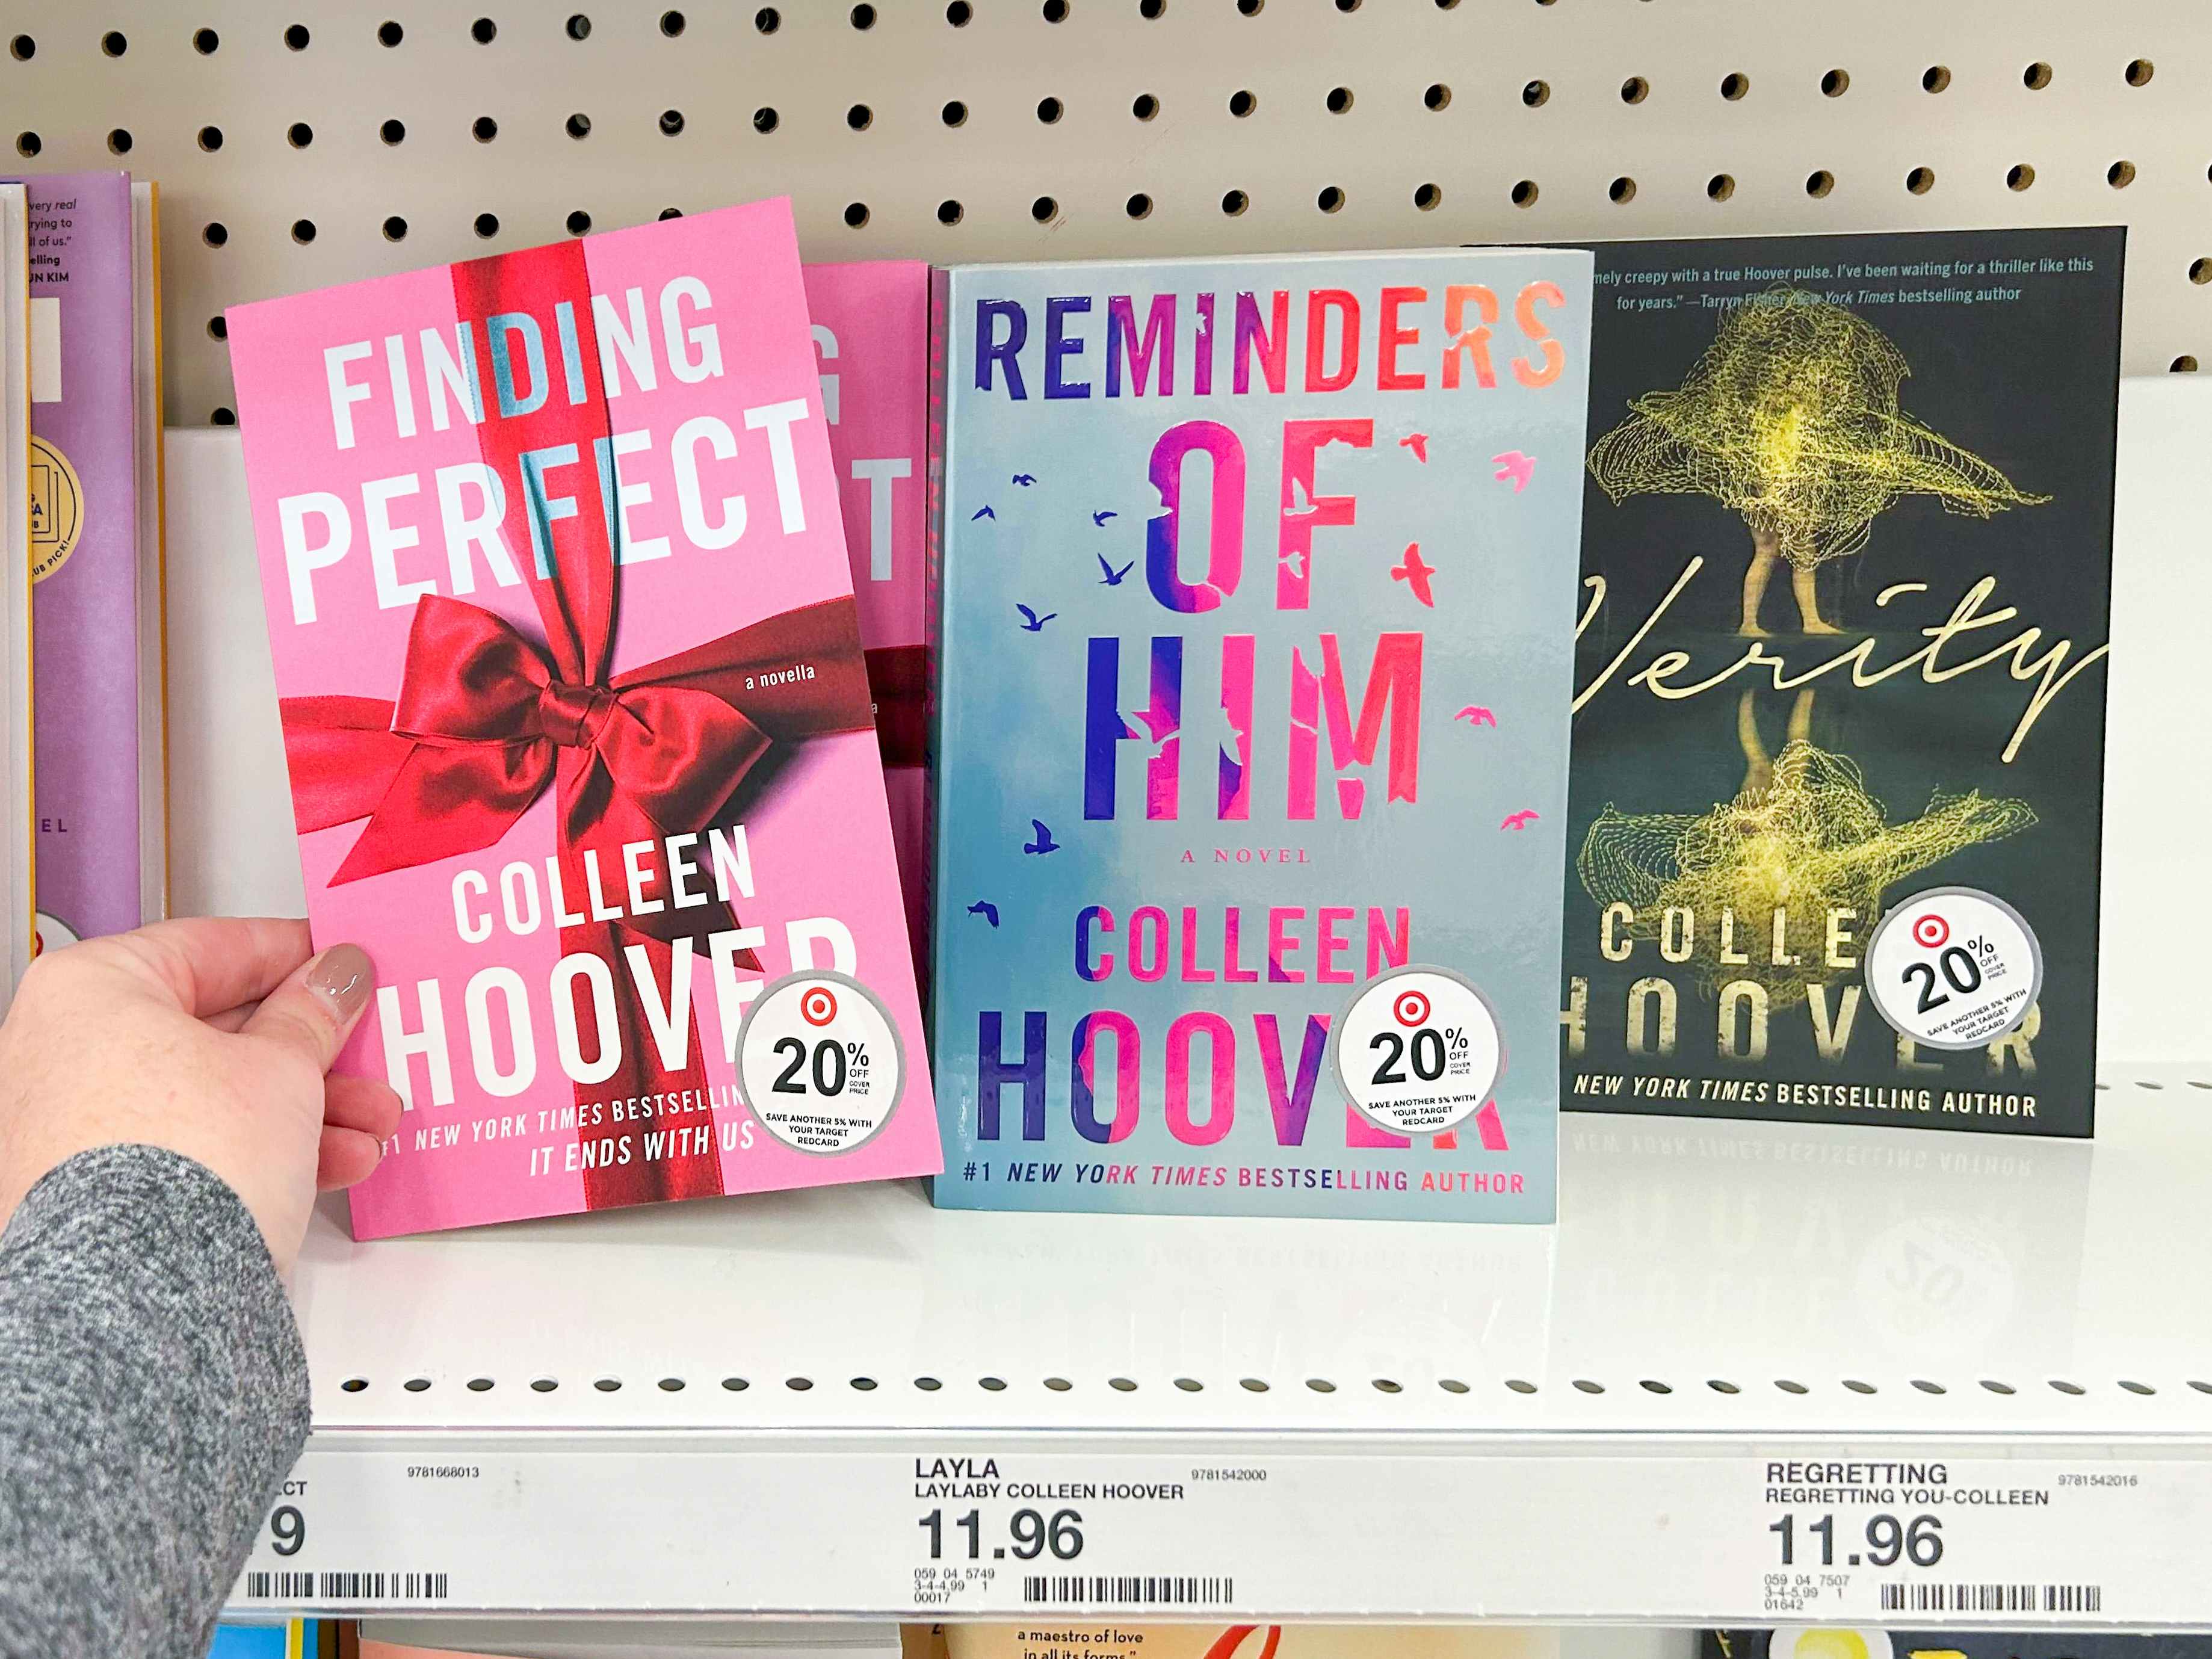 A person taking a Colleen Hoover book from a shelf at Target